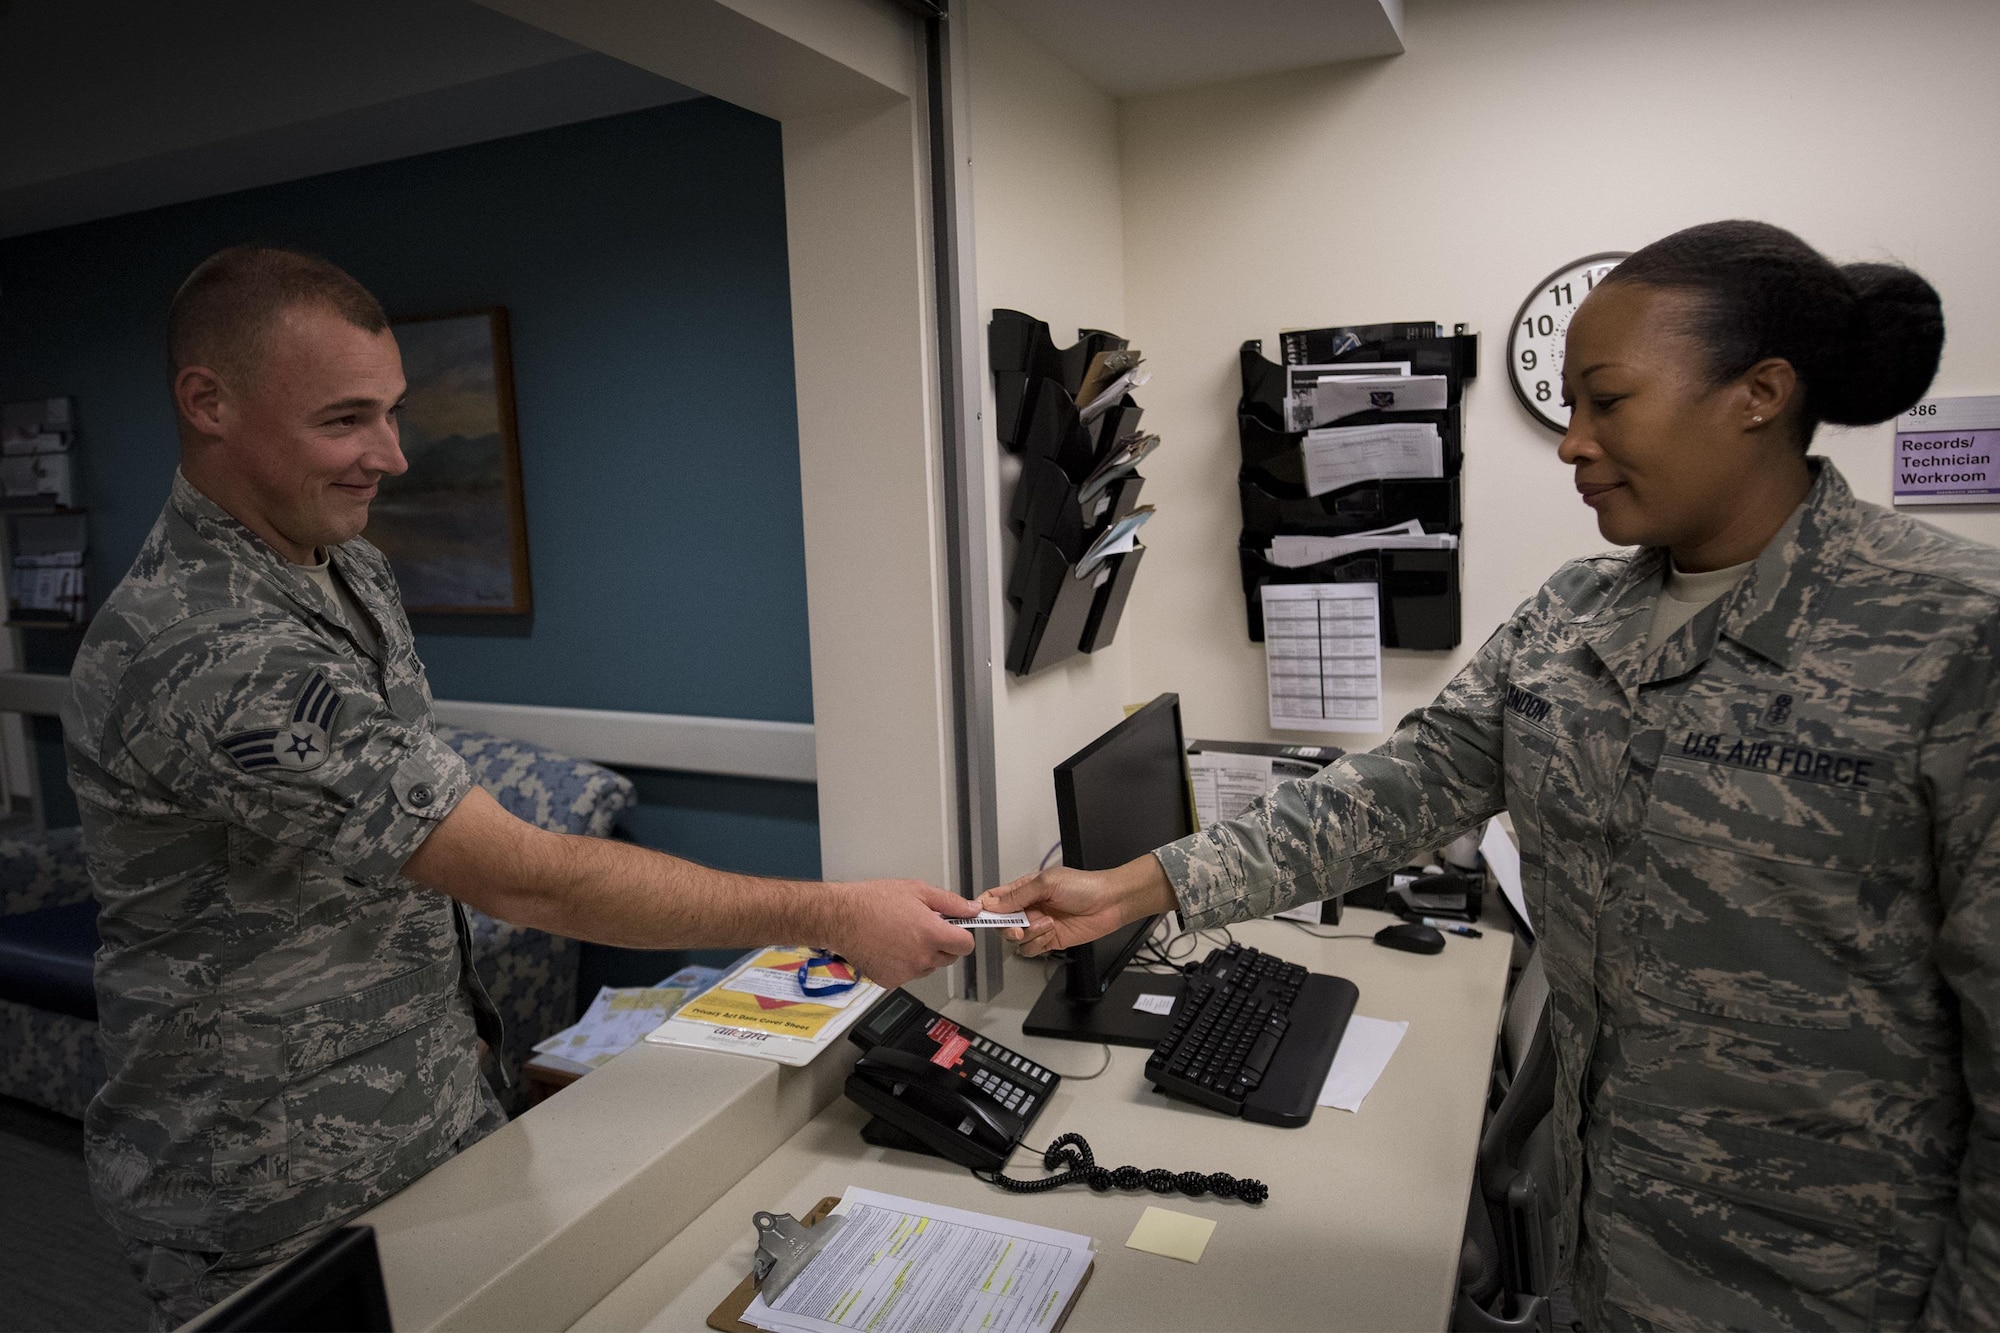 Master Sgt. Tracey McLendon, 23d Medical Support Squadron flight chief of diagnostic imaging, receives an identification card from Senior Airman Jeffrey Nelligan, 355th Medical Support Squadron diagnostic imagining technologist, Oct. 24, 2016, at Moody Air Force Base, Ga. The 23d MDSS radiology diagnostic imaging specialists use sophisticated technology to capture images of the human body to assist physicians in diagnosing patients quickly and accurately. (U.S. Air Force photo by Airman 1st Class Daniel Snider)